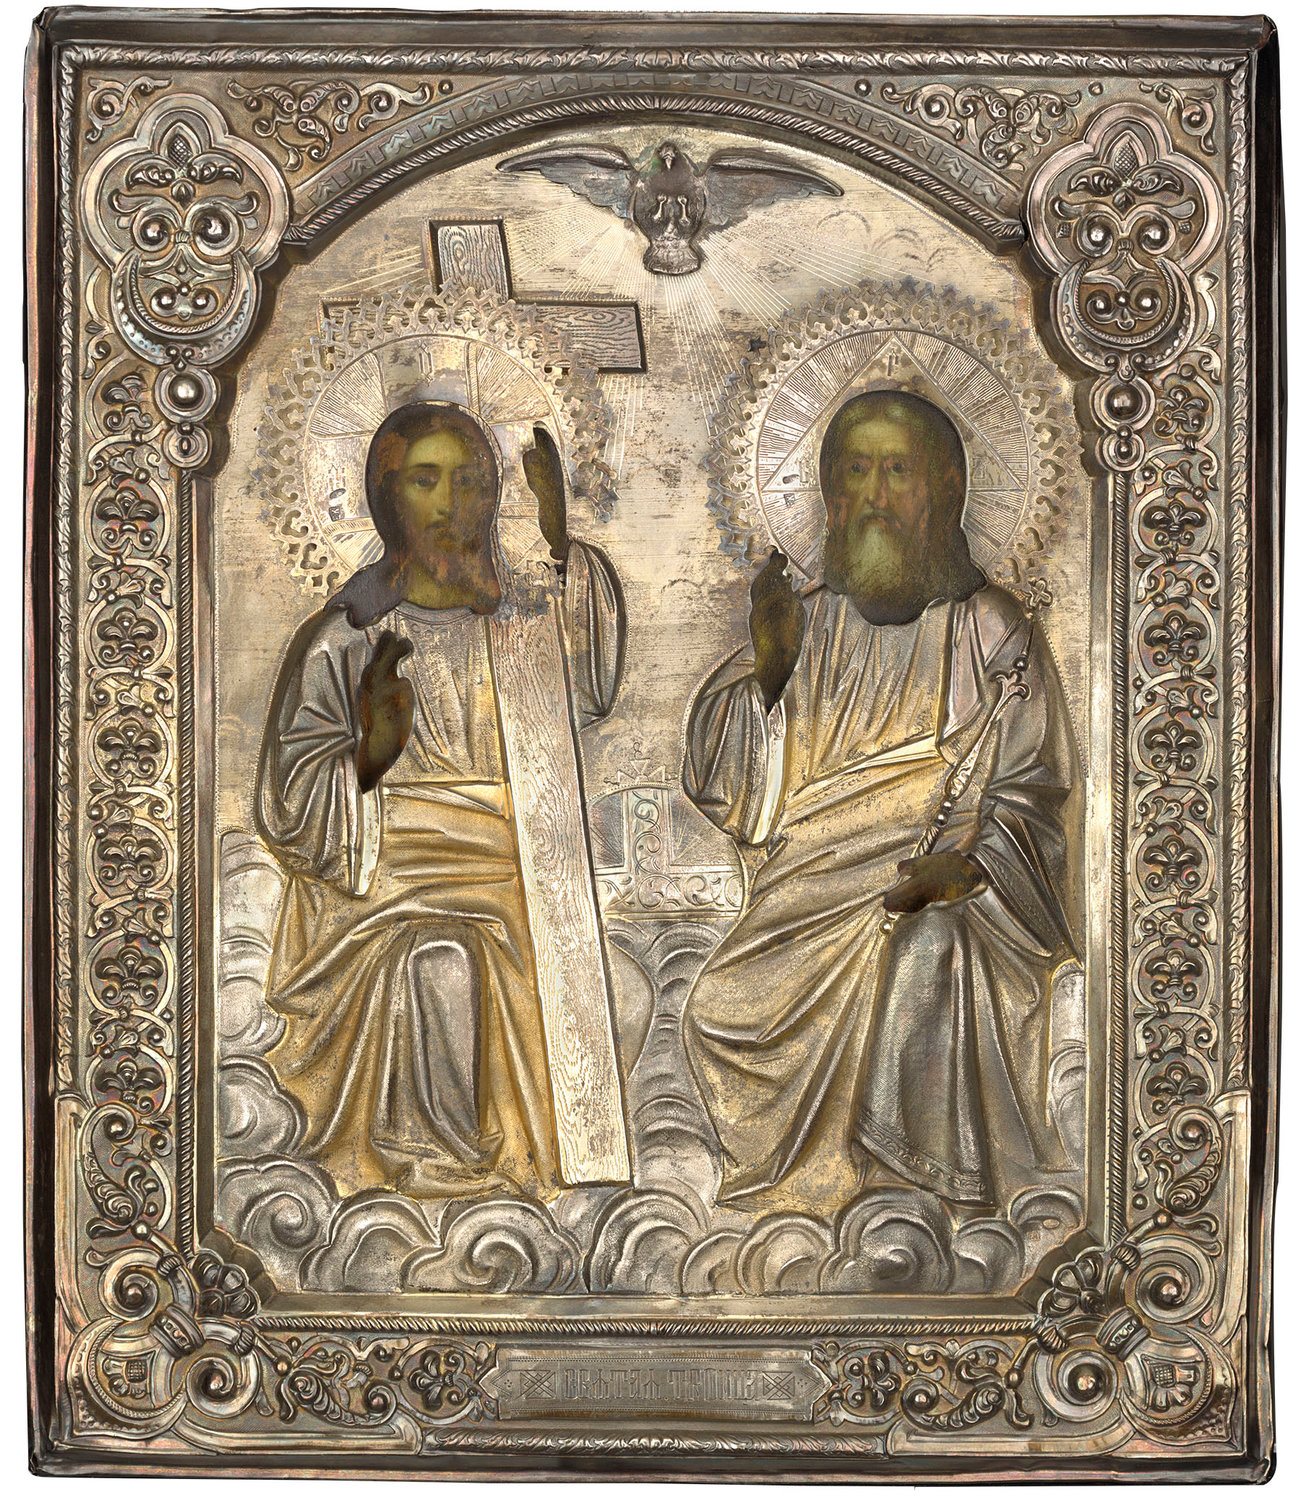 The Holy Trinity, 1800s, anonymous artist, egg tempera on wood with tin oklad, 12 inches x 10.5 inches x 1.25 inches.